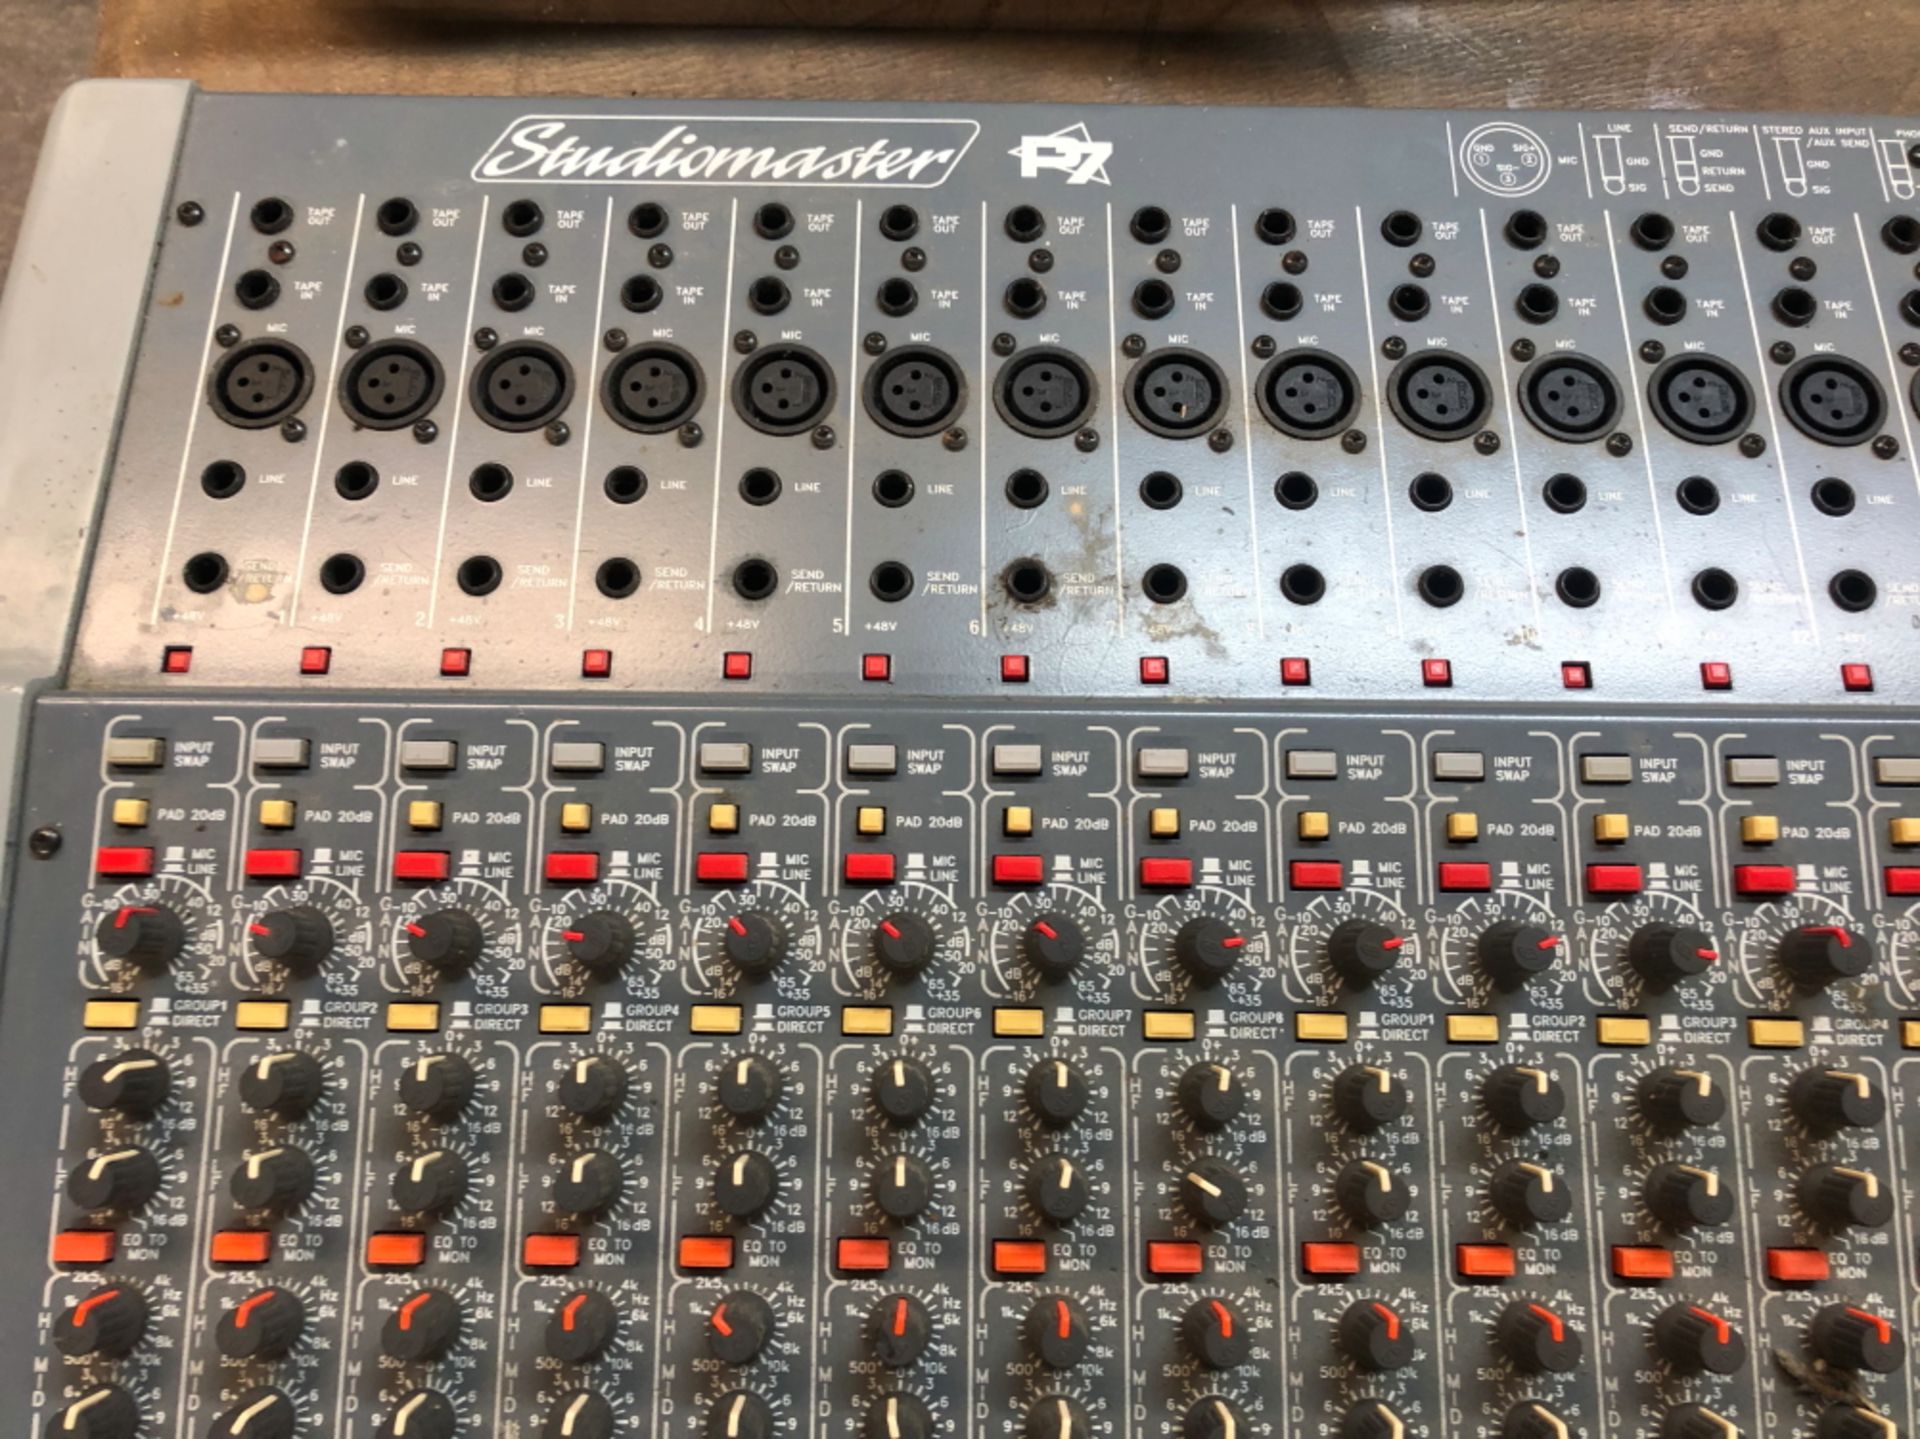 A STUDIO MASTER P7 MULTITRACK MIXING CONSOLE WITH MANUAL AND EXTERNAL POWER SUPPLY UNIT - Image 4 of 17